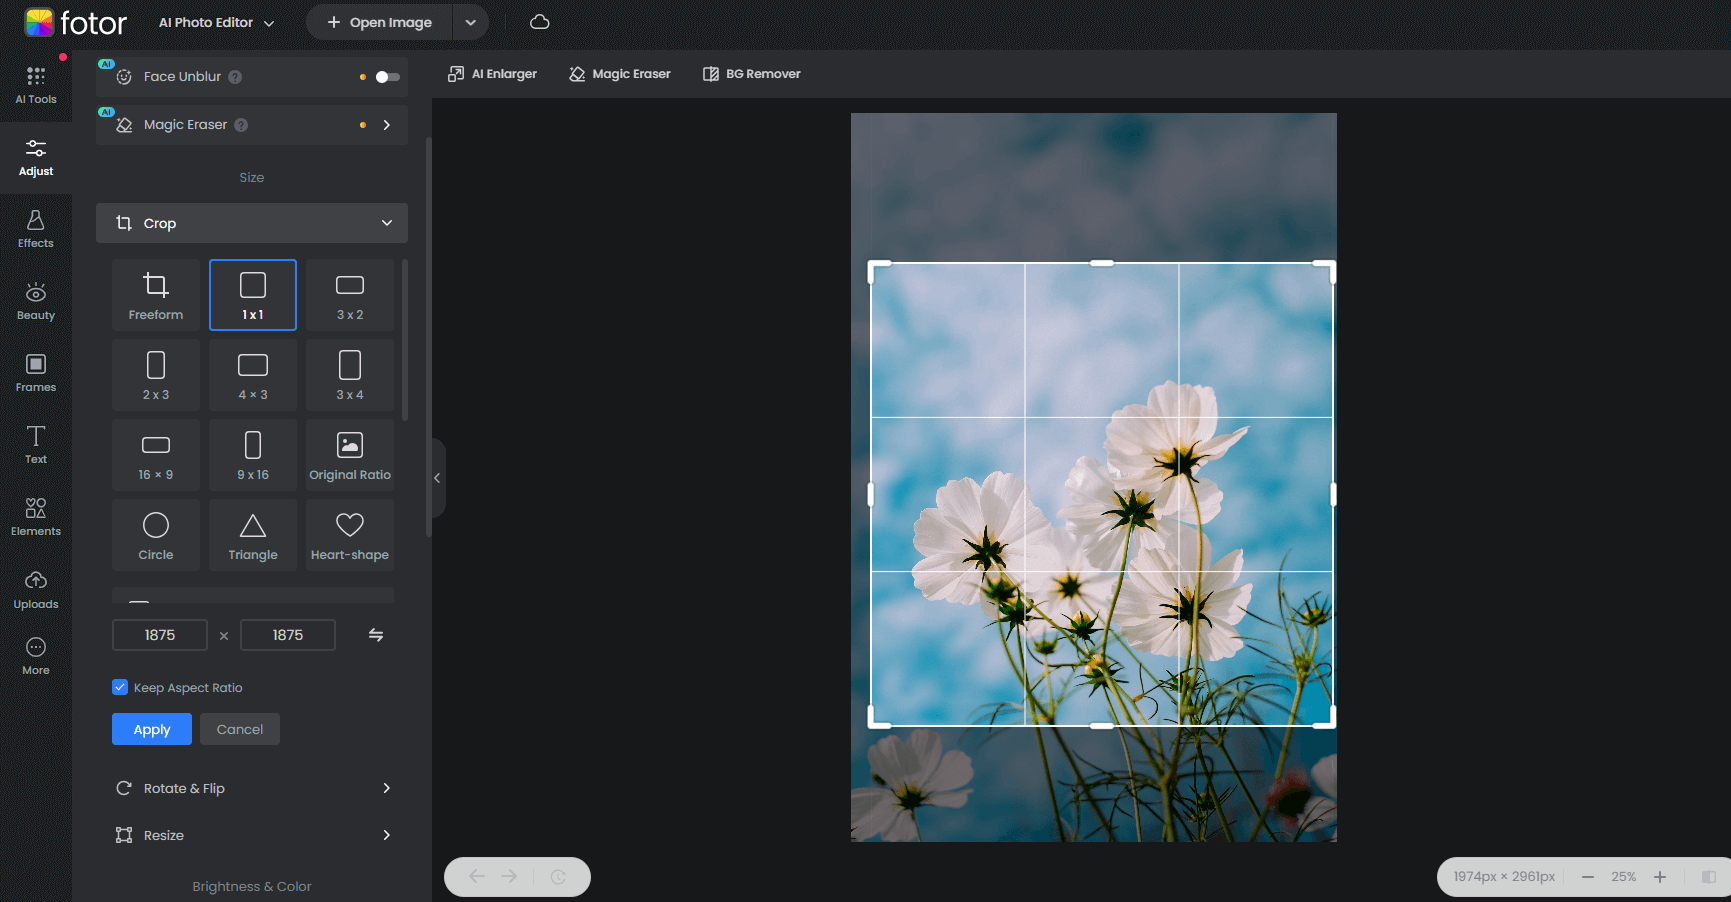 crop the white petaled flowers image to 1 by 1 ratio on fotor